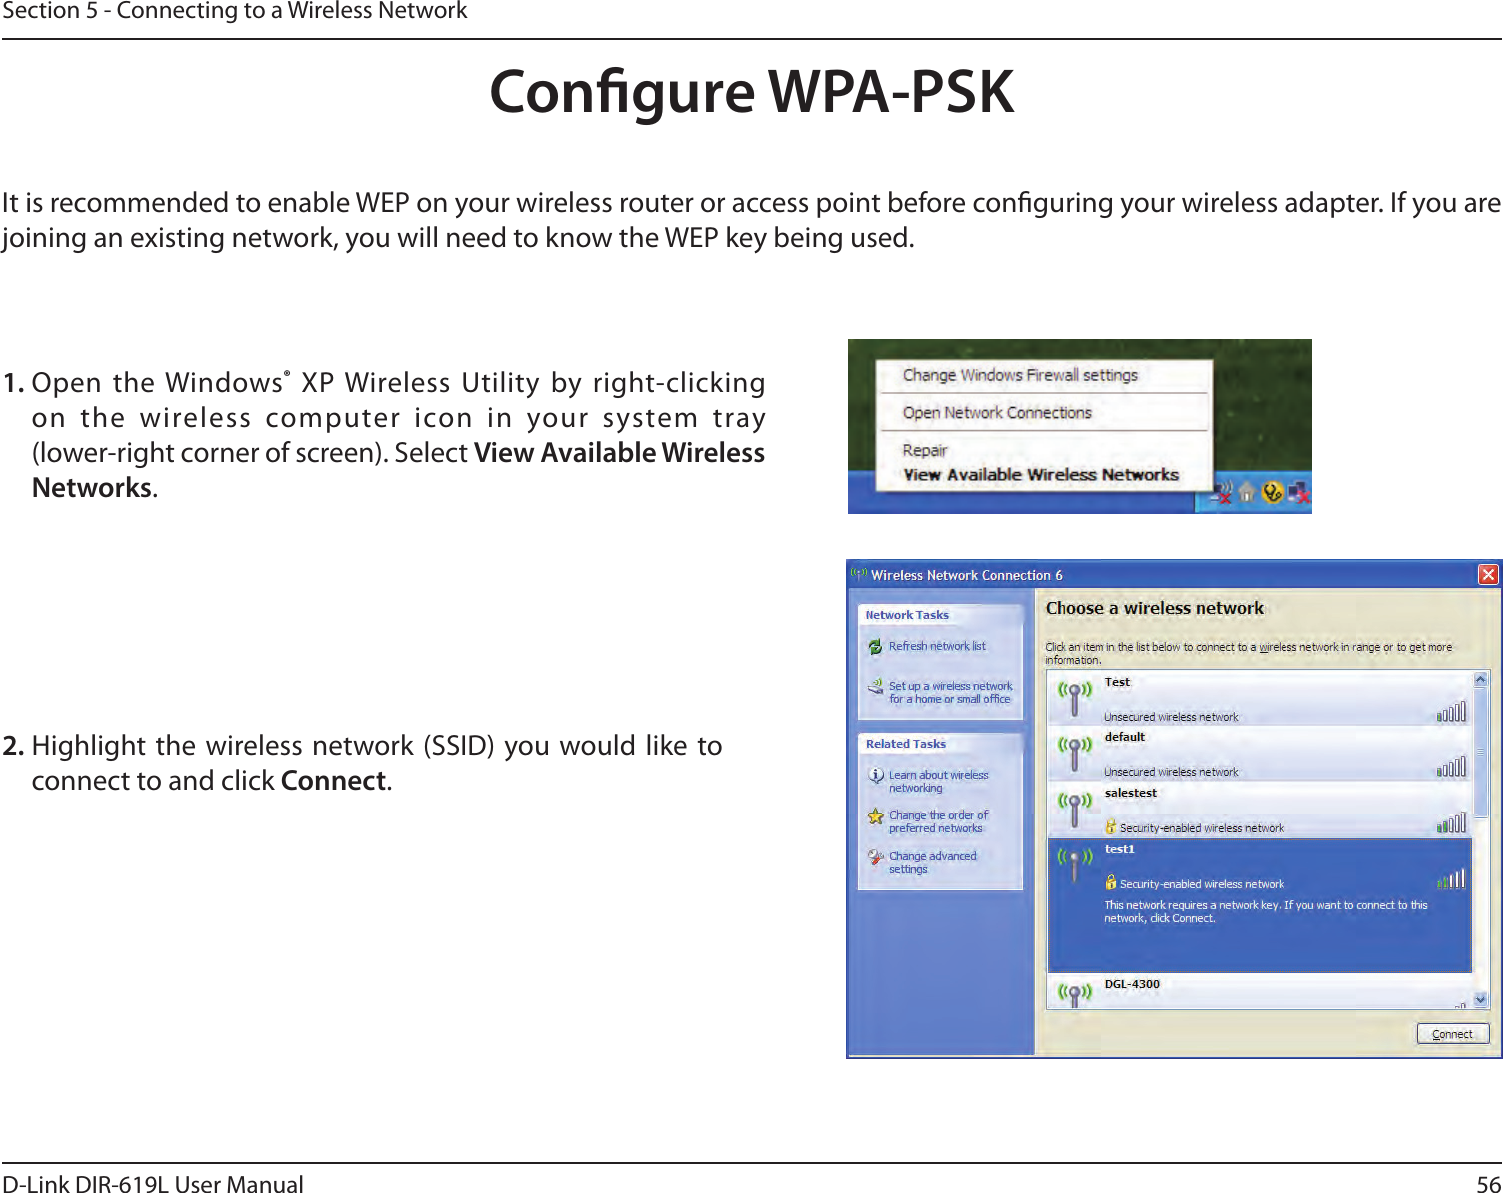 56D-Link DIR-619L User ManualSection 5 - Connecting to a Wireless NetworkCongure WPA-PSKIt is recommended to enable WEP on your wireless router or access point before conguring your wireless adapter. If you are joining an existing network, you will need to know the WEP key being used.2. Highlight the wireless network (SSID) you would  like to connect to and click Connect.1. Open the Windows® XP Wireless Utility by right-clicking on  the  wireless  computer  icon  in  your  system  tray  (lower-right corner of screen). Select View Available Wireless Networks. 